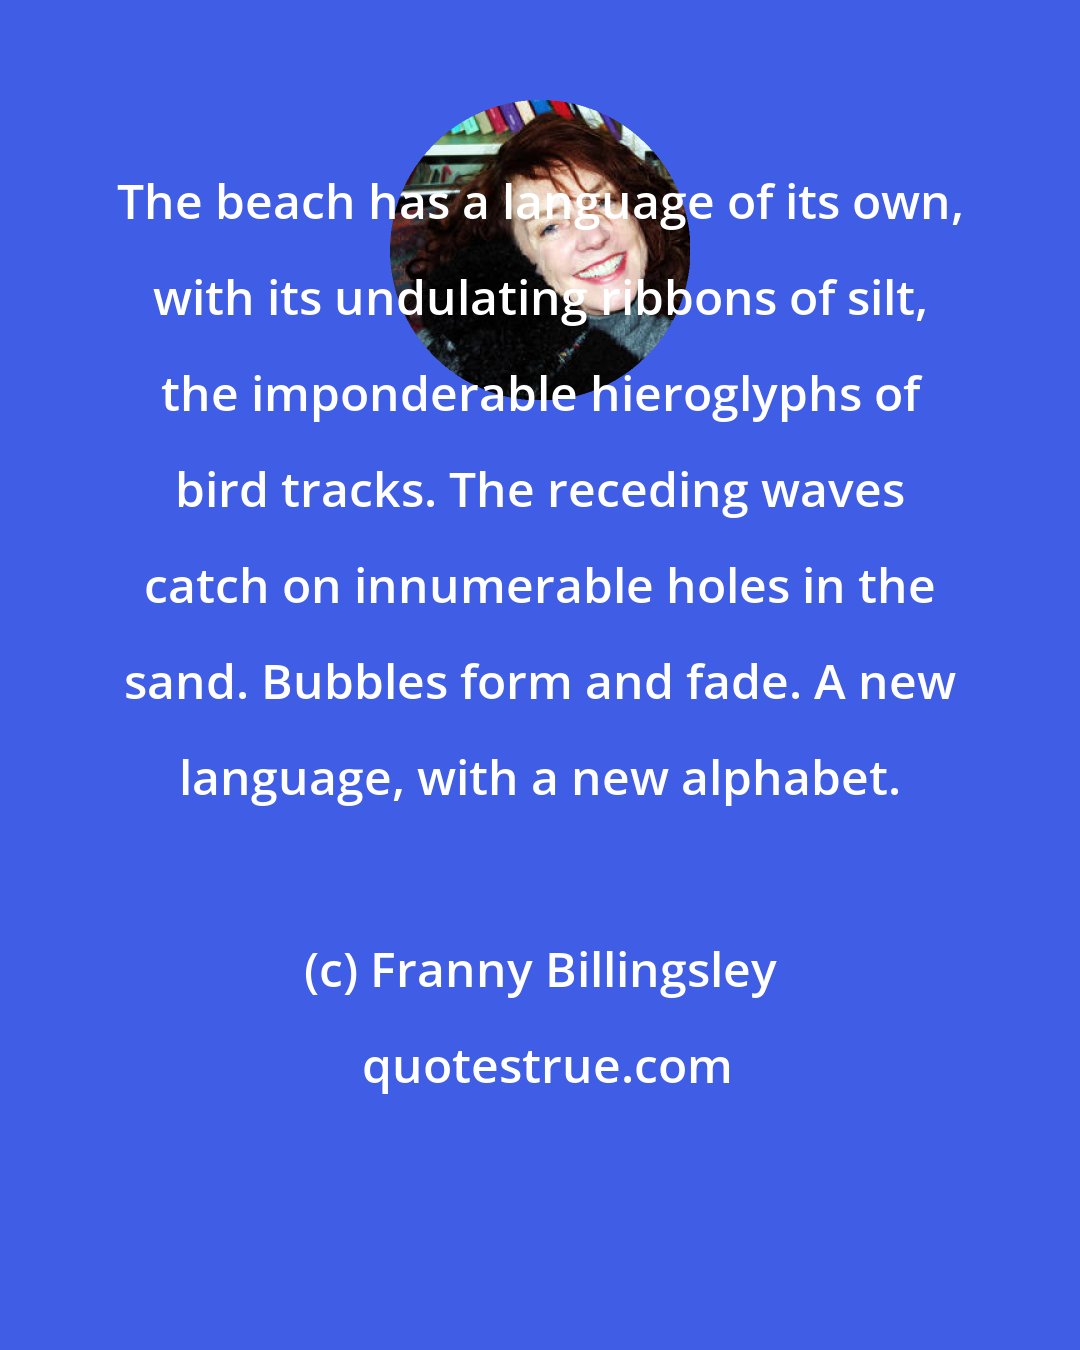 Franny Billingsley: The beach has a language of its own, with its undulating ribbons of silt, the imponderable hieroglyphs of bird tracks. The receding waves catch on innumerable holes in the sand. Bubbles form and fade. A new language, with a new alphabet.